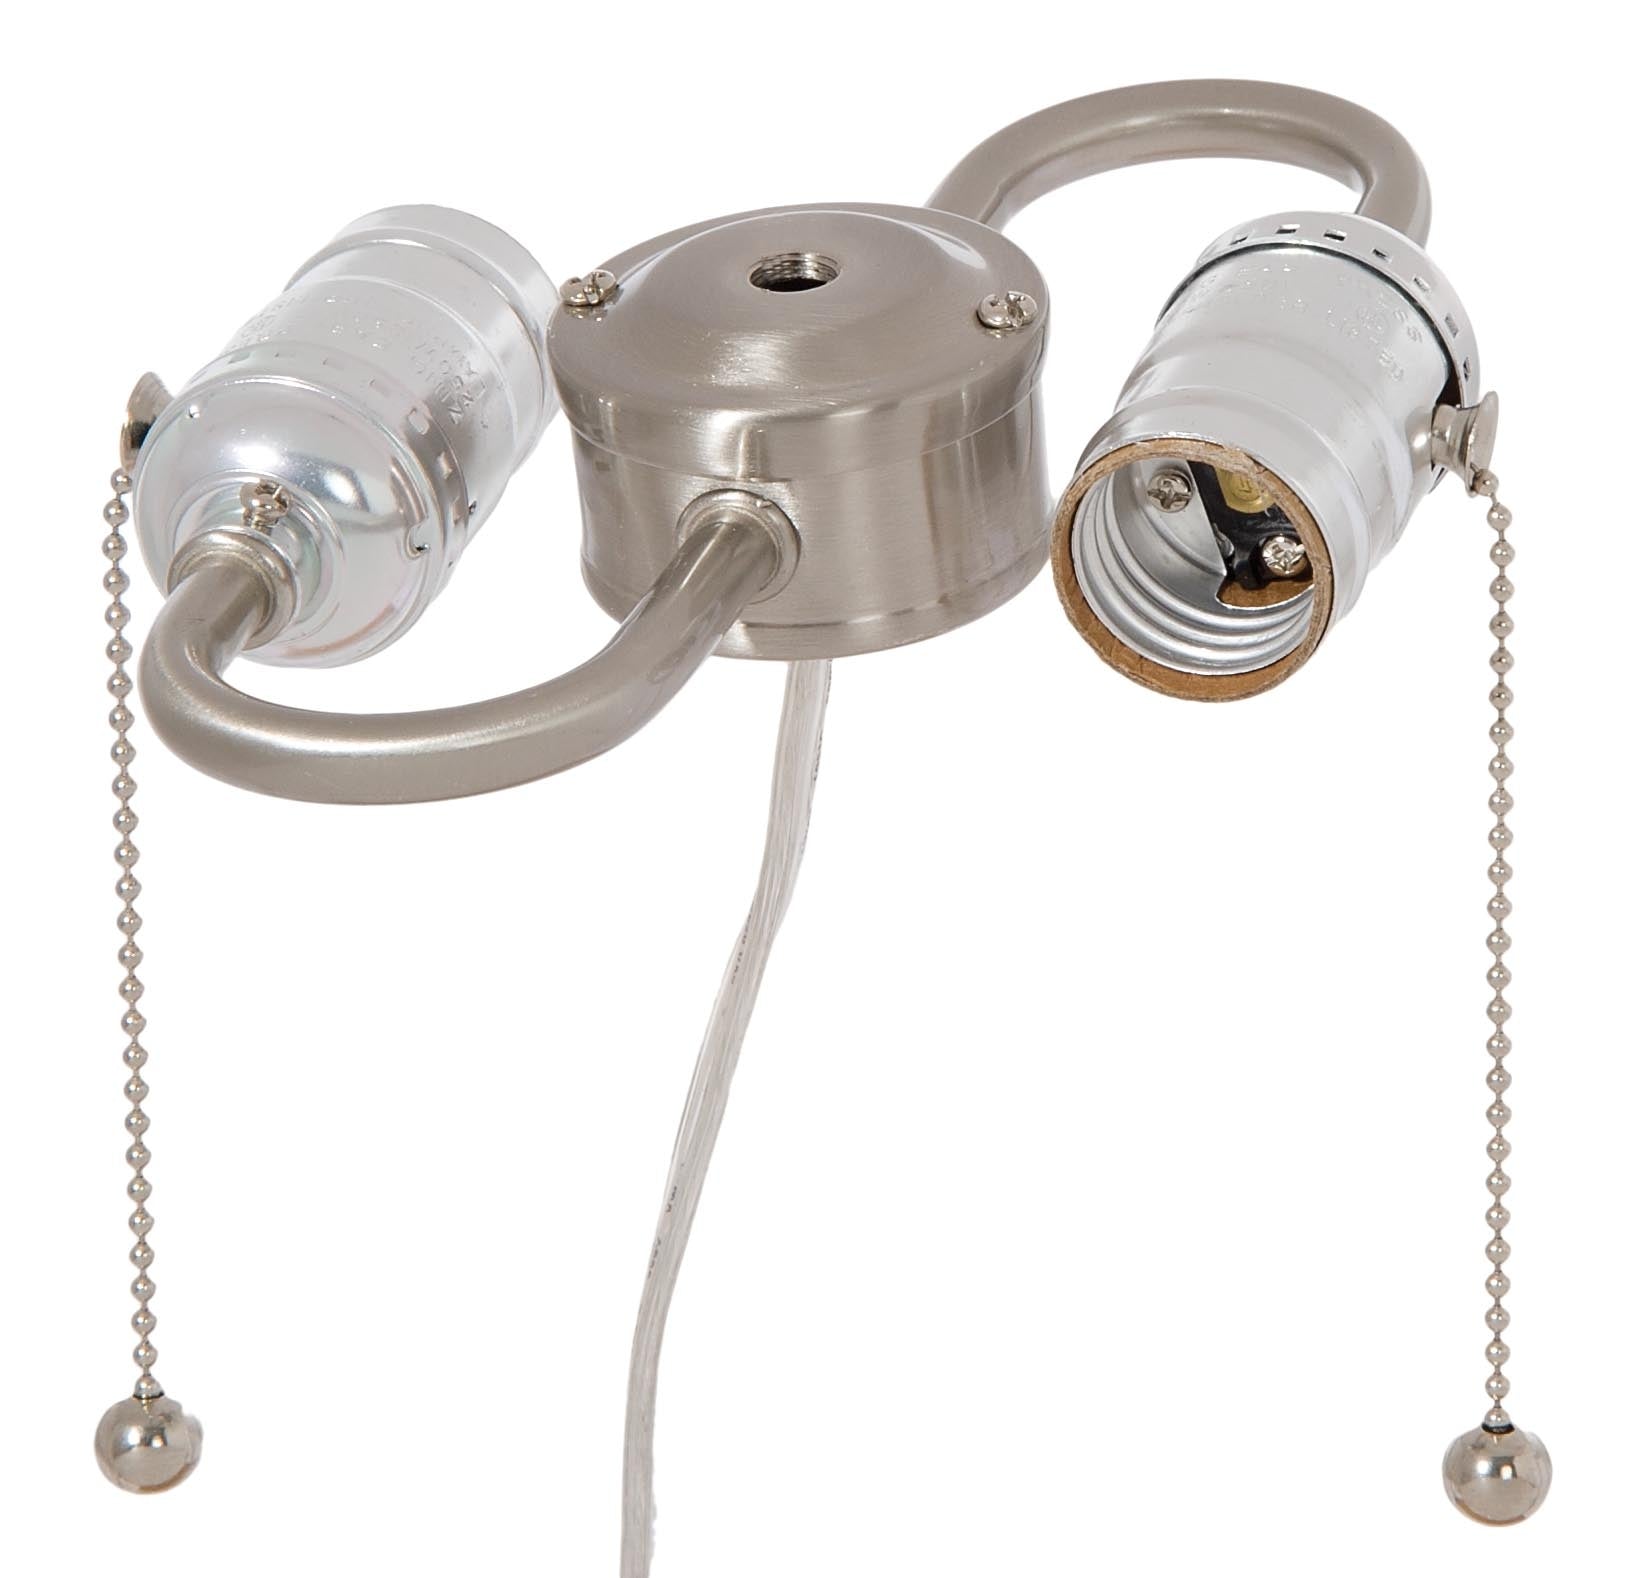 B&p Lamp Medium Base E26 Two Light Pull Chain Lamp Cluster with Leads